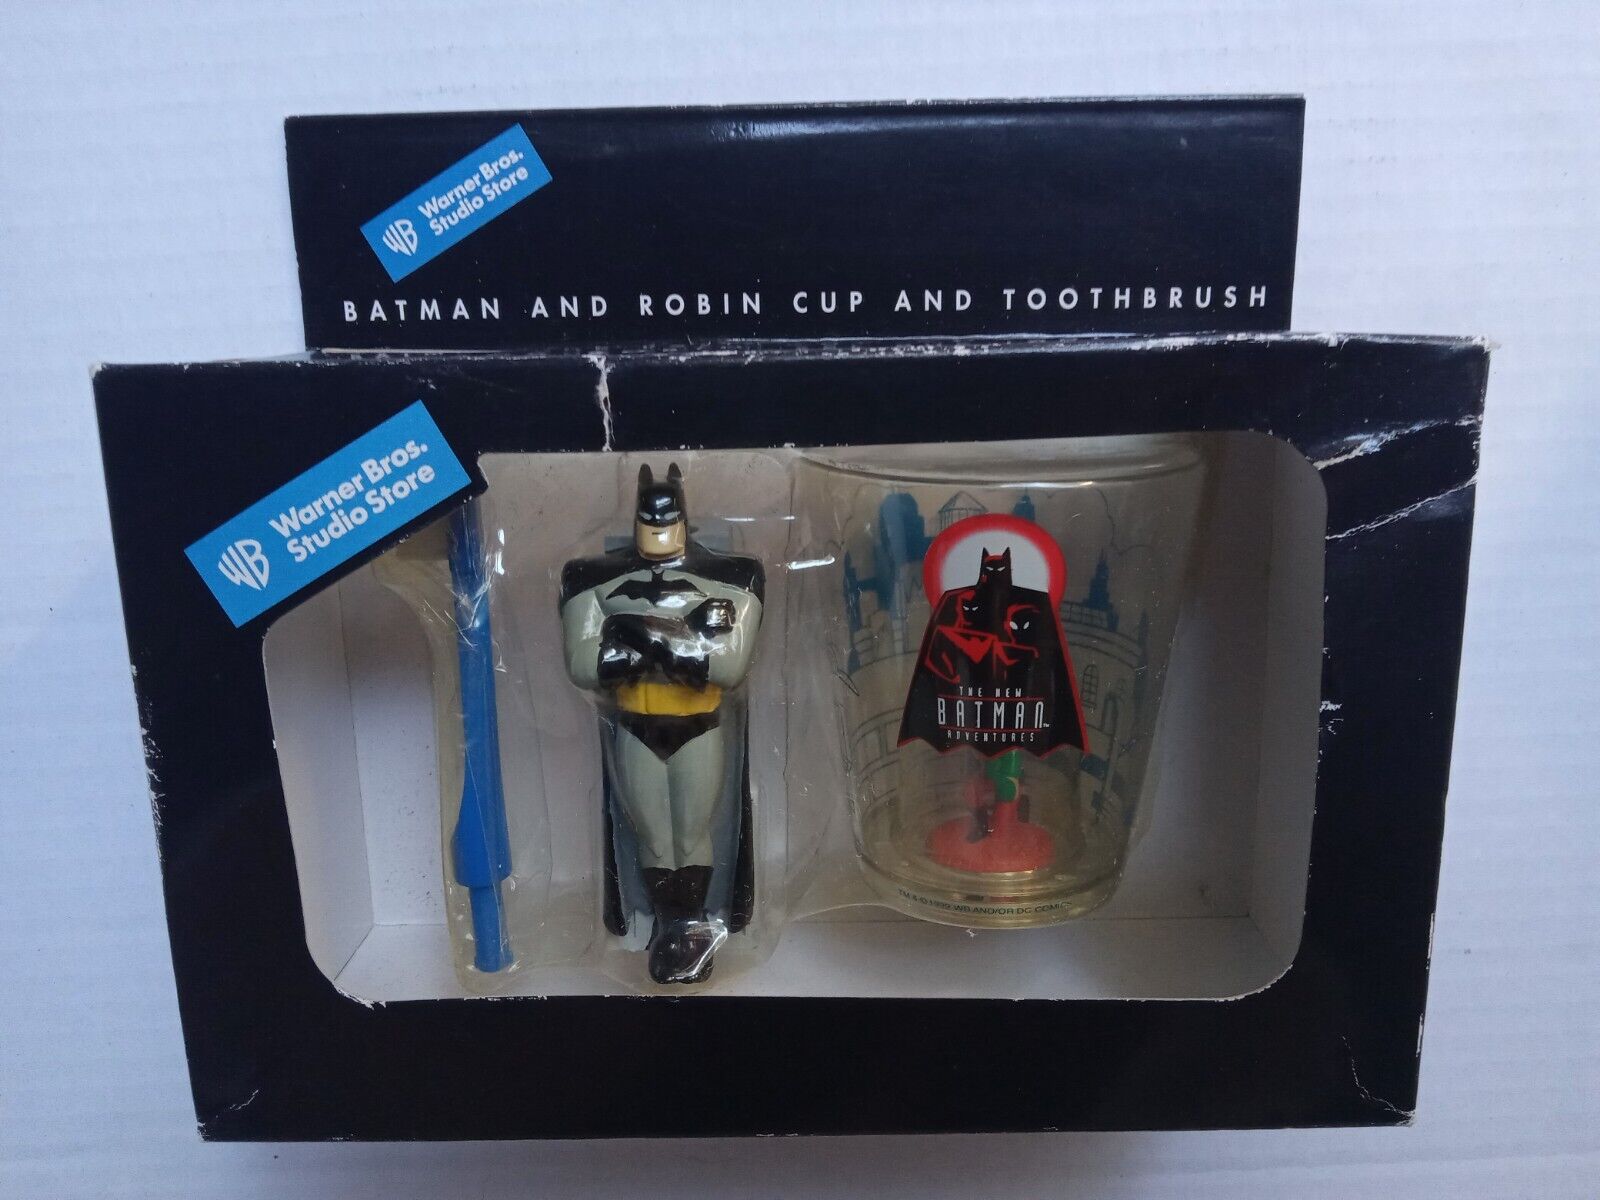 Never Opened Warner Bros. Vintage 1998 Batman and Robin Cup and Toothbrush Set